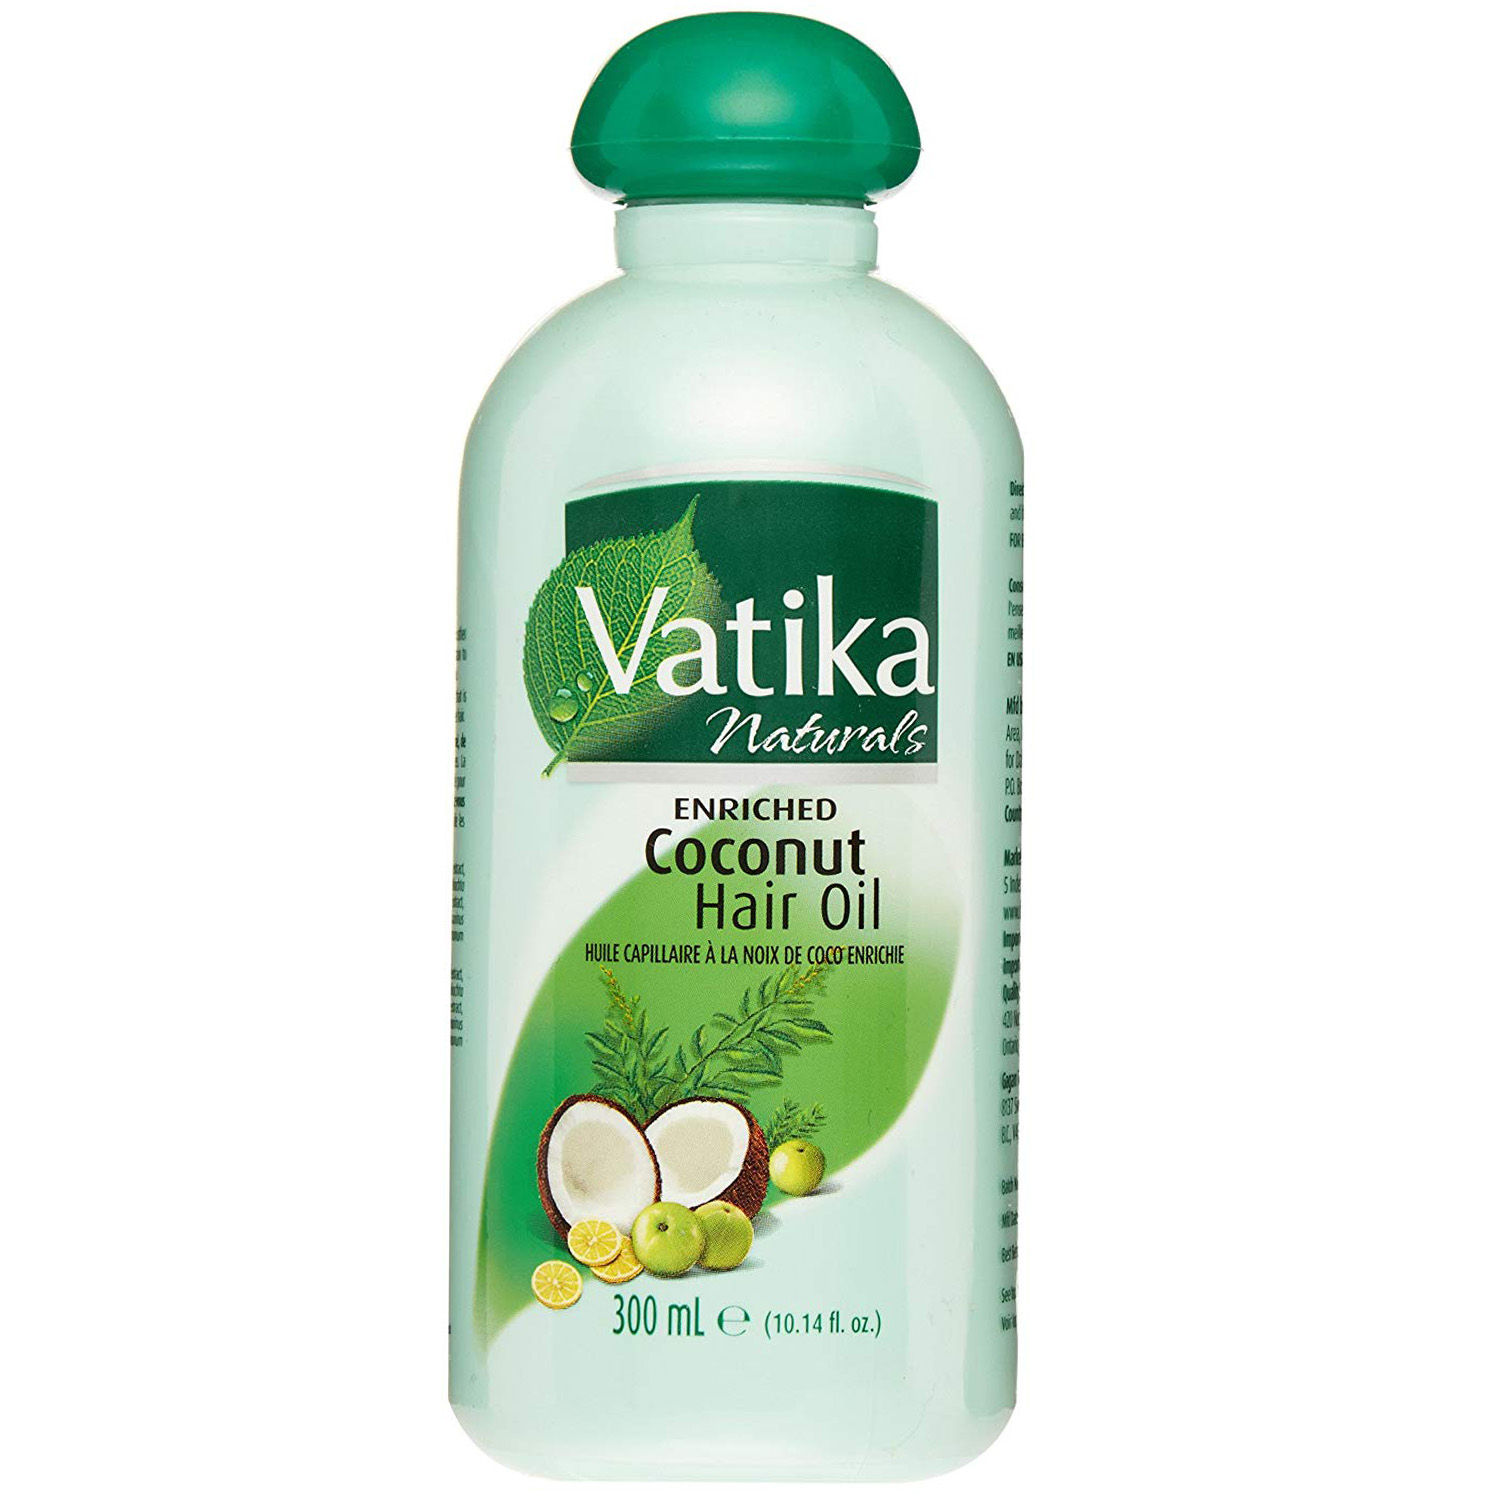 Vatika Enriched Olive Hair Oil, 100 ml Price, Uses, Side Effects,  Composition - Apollo Pharmacy